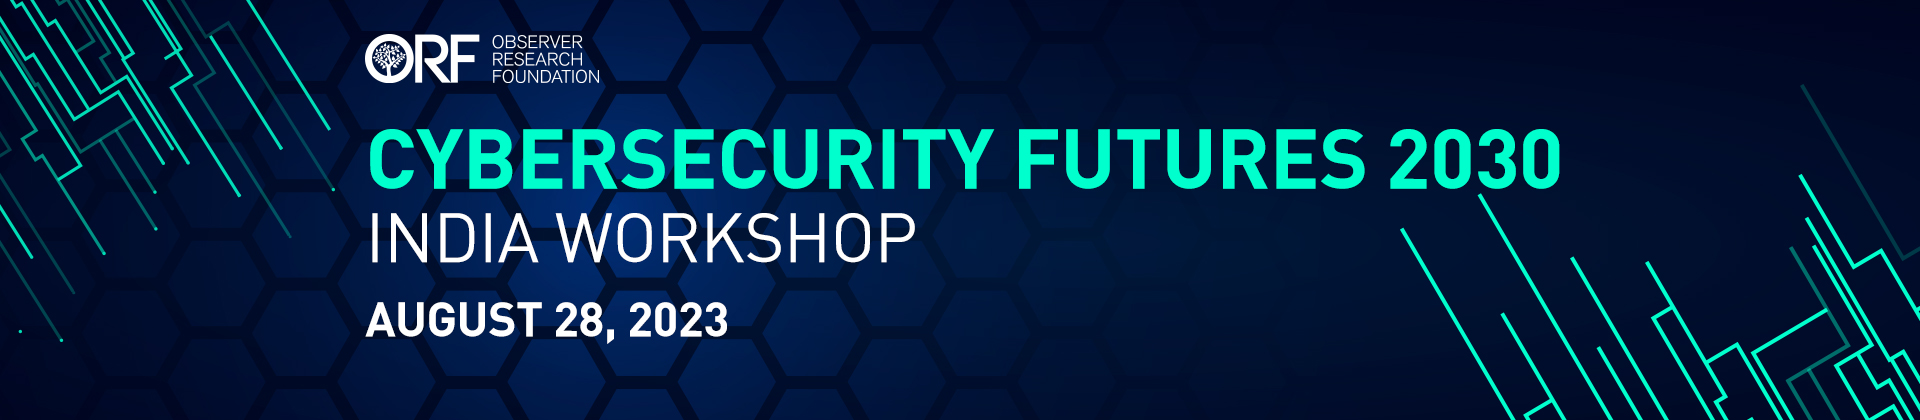 Cybersecurity Futures 2030: India Workshop